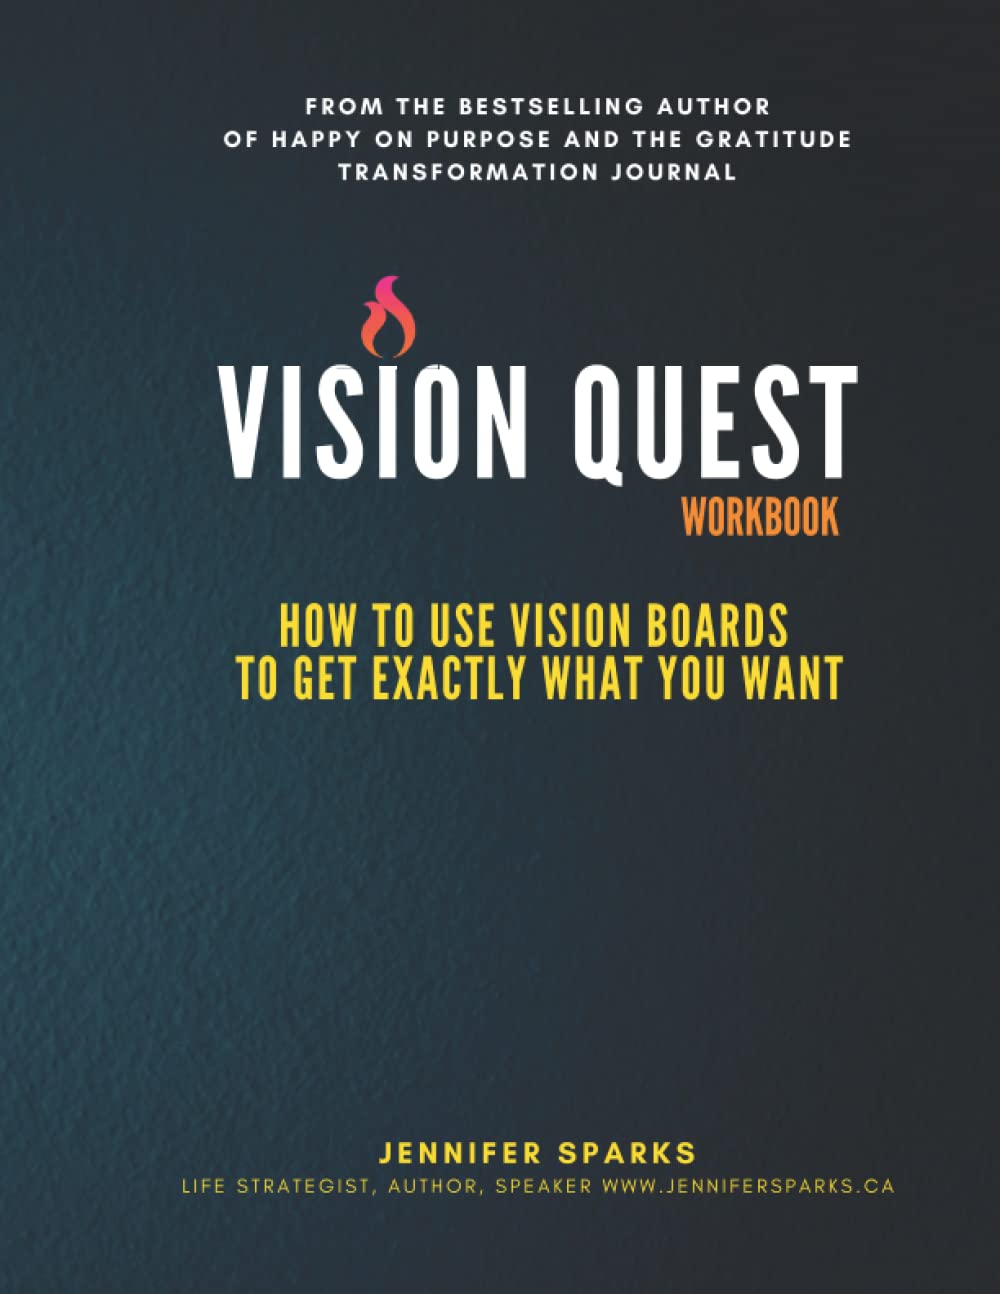 Vision Quest Workbook: How To Use Vision Boards To Get Exactly What You Want